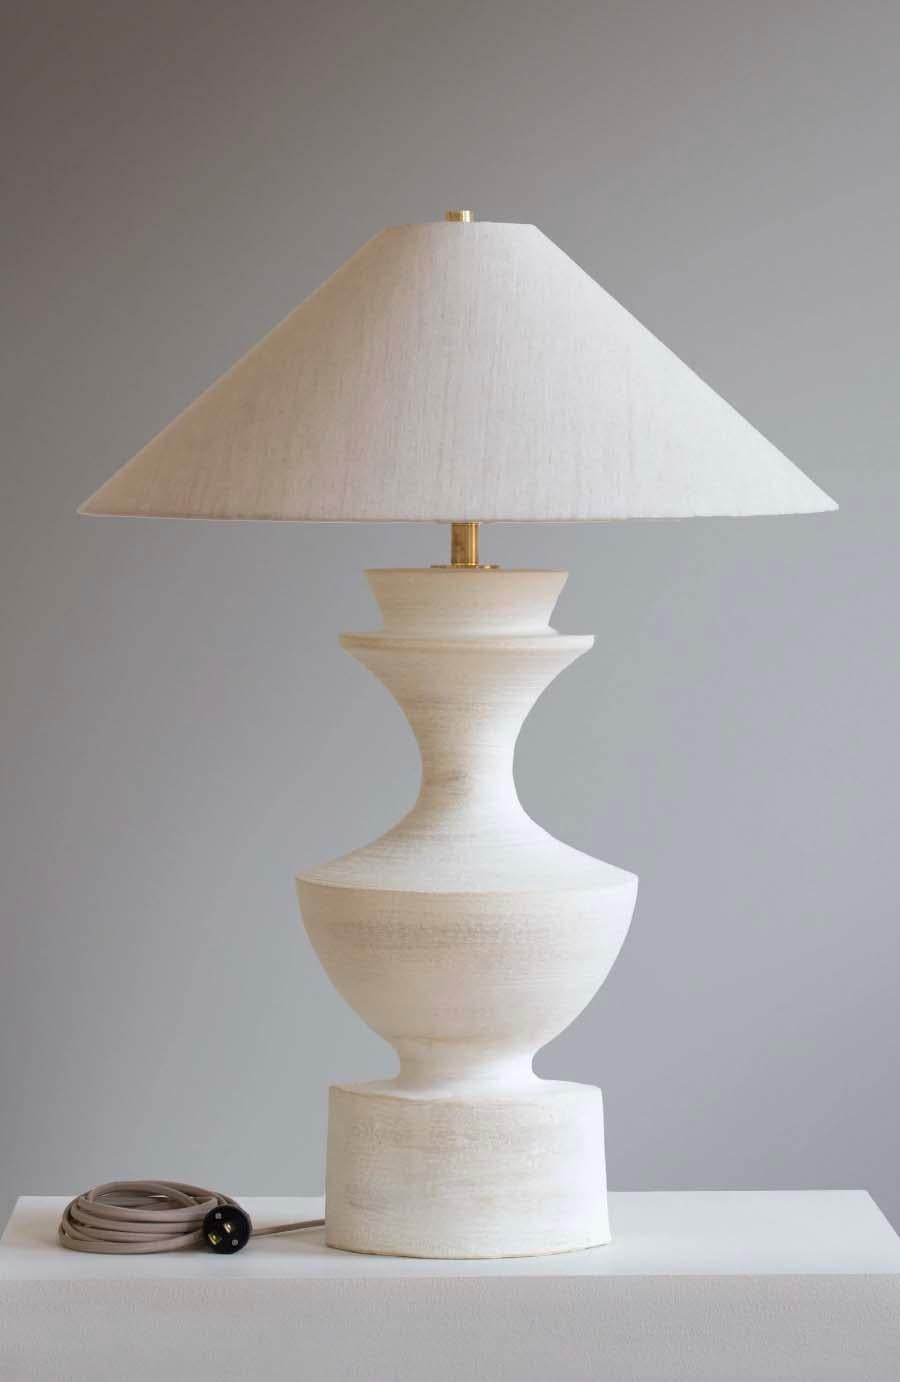 The Sophia lamp is handmade studio pottery by ceramic artist by Danny Kaplan. Shade included. Please note exact dimensions may vary.

Born in New York City and raised in Aix-en-Provence, France, Danny Kaplan’s passion for ceramics was shaped by